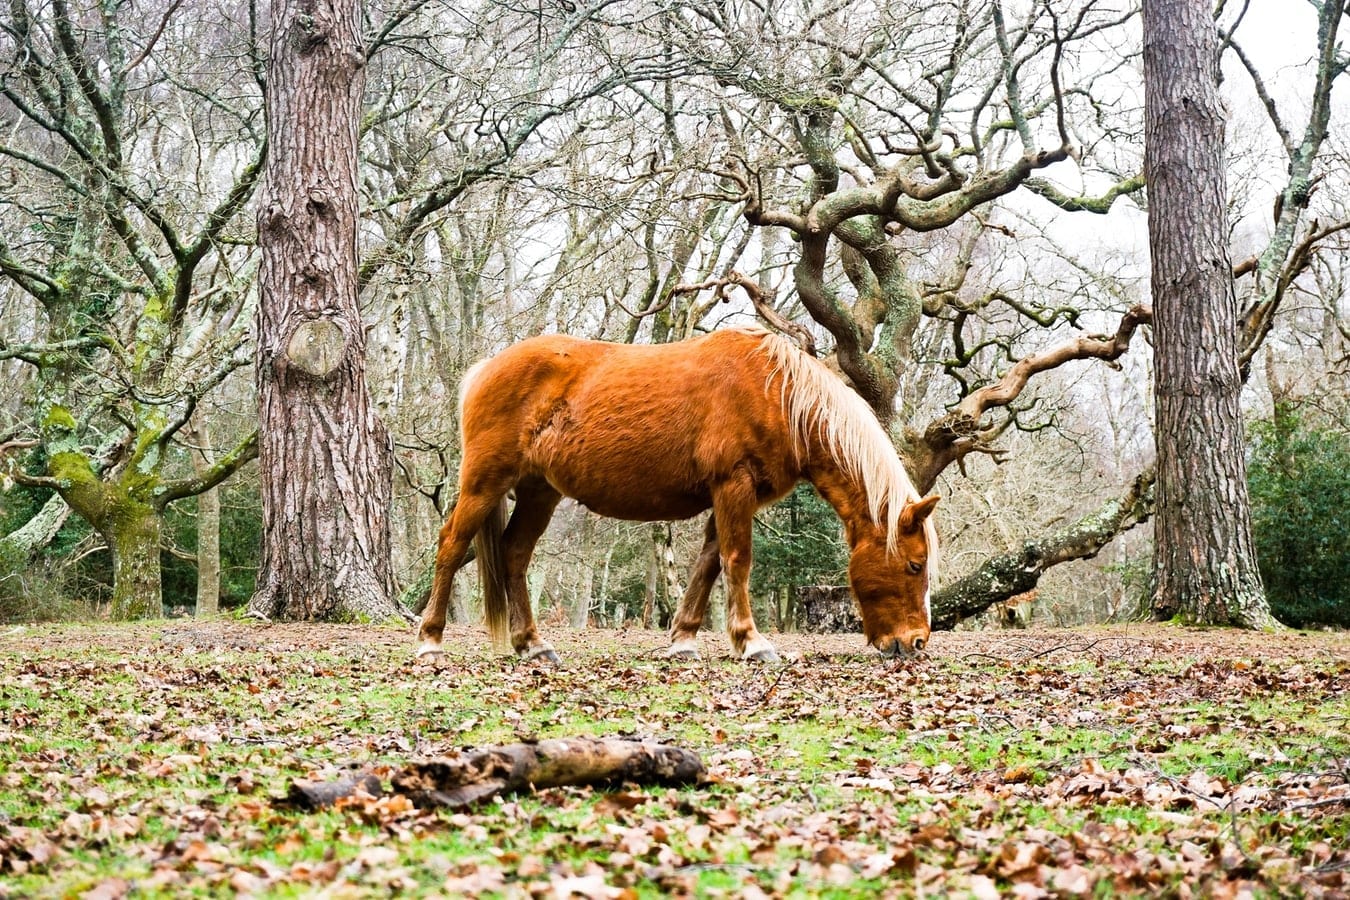 If you hire one of our campervans in The New Forest, you can see all of the amazing wildlife.